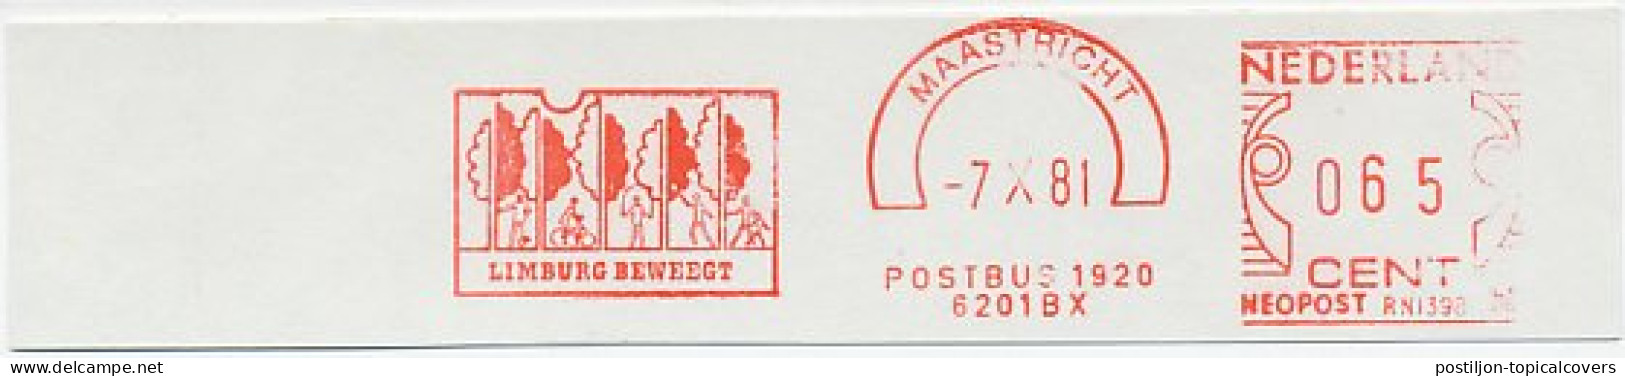 Meter Cut Netherlands 1981 Recreation - Cycling - Football - Jumping Rope - Badminton - Ciclismo